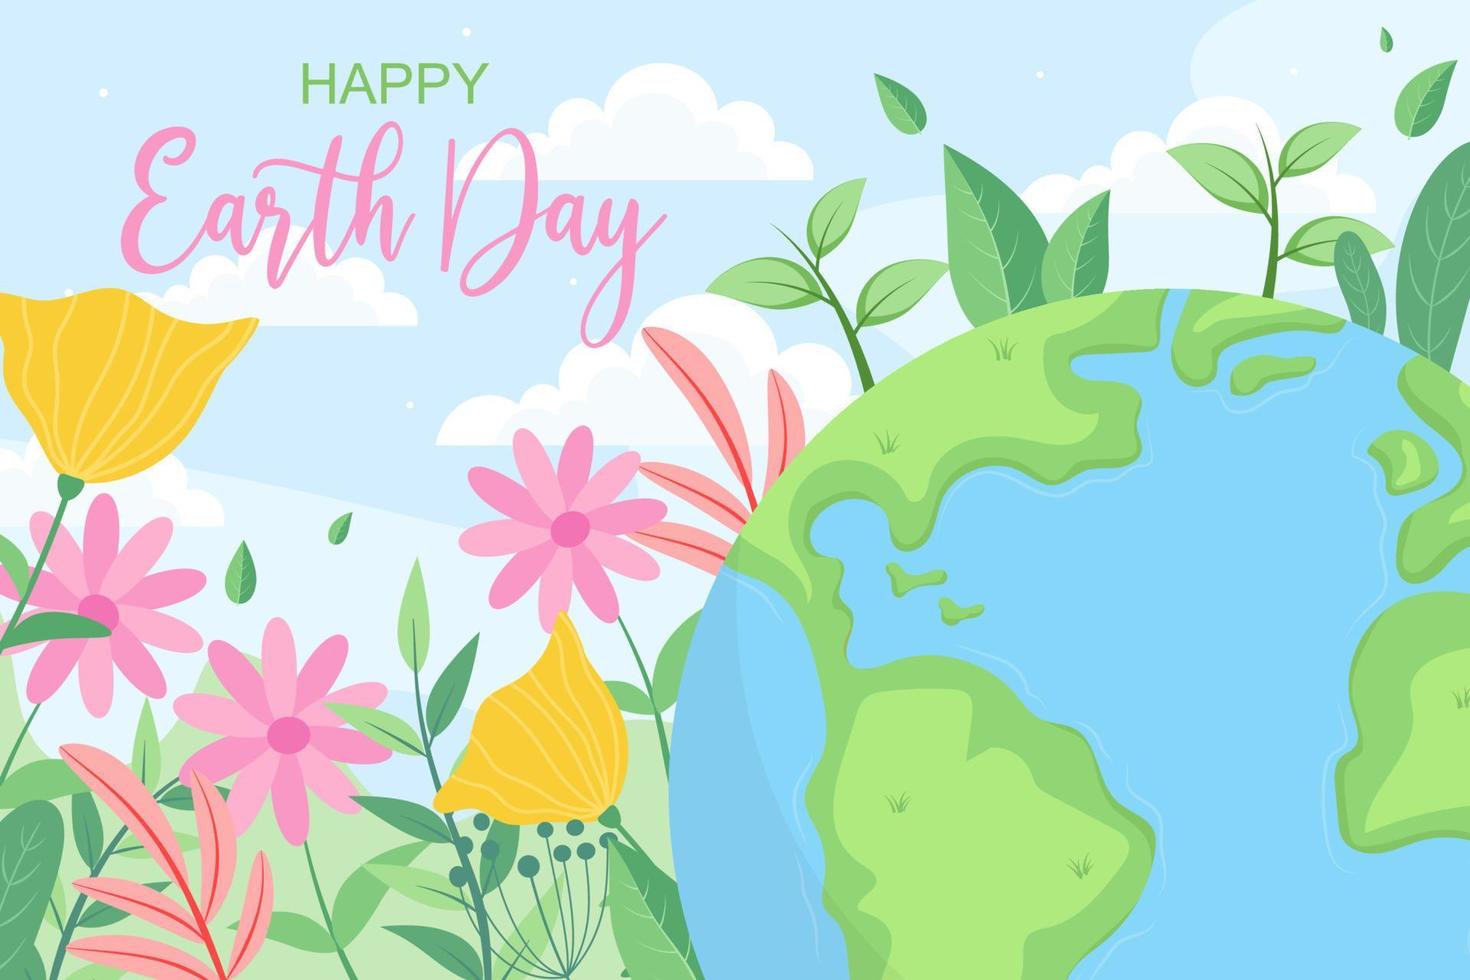 Happy Earth Day poster or banner with illustration of natural landscape vector